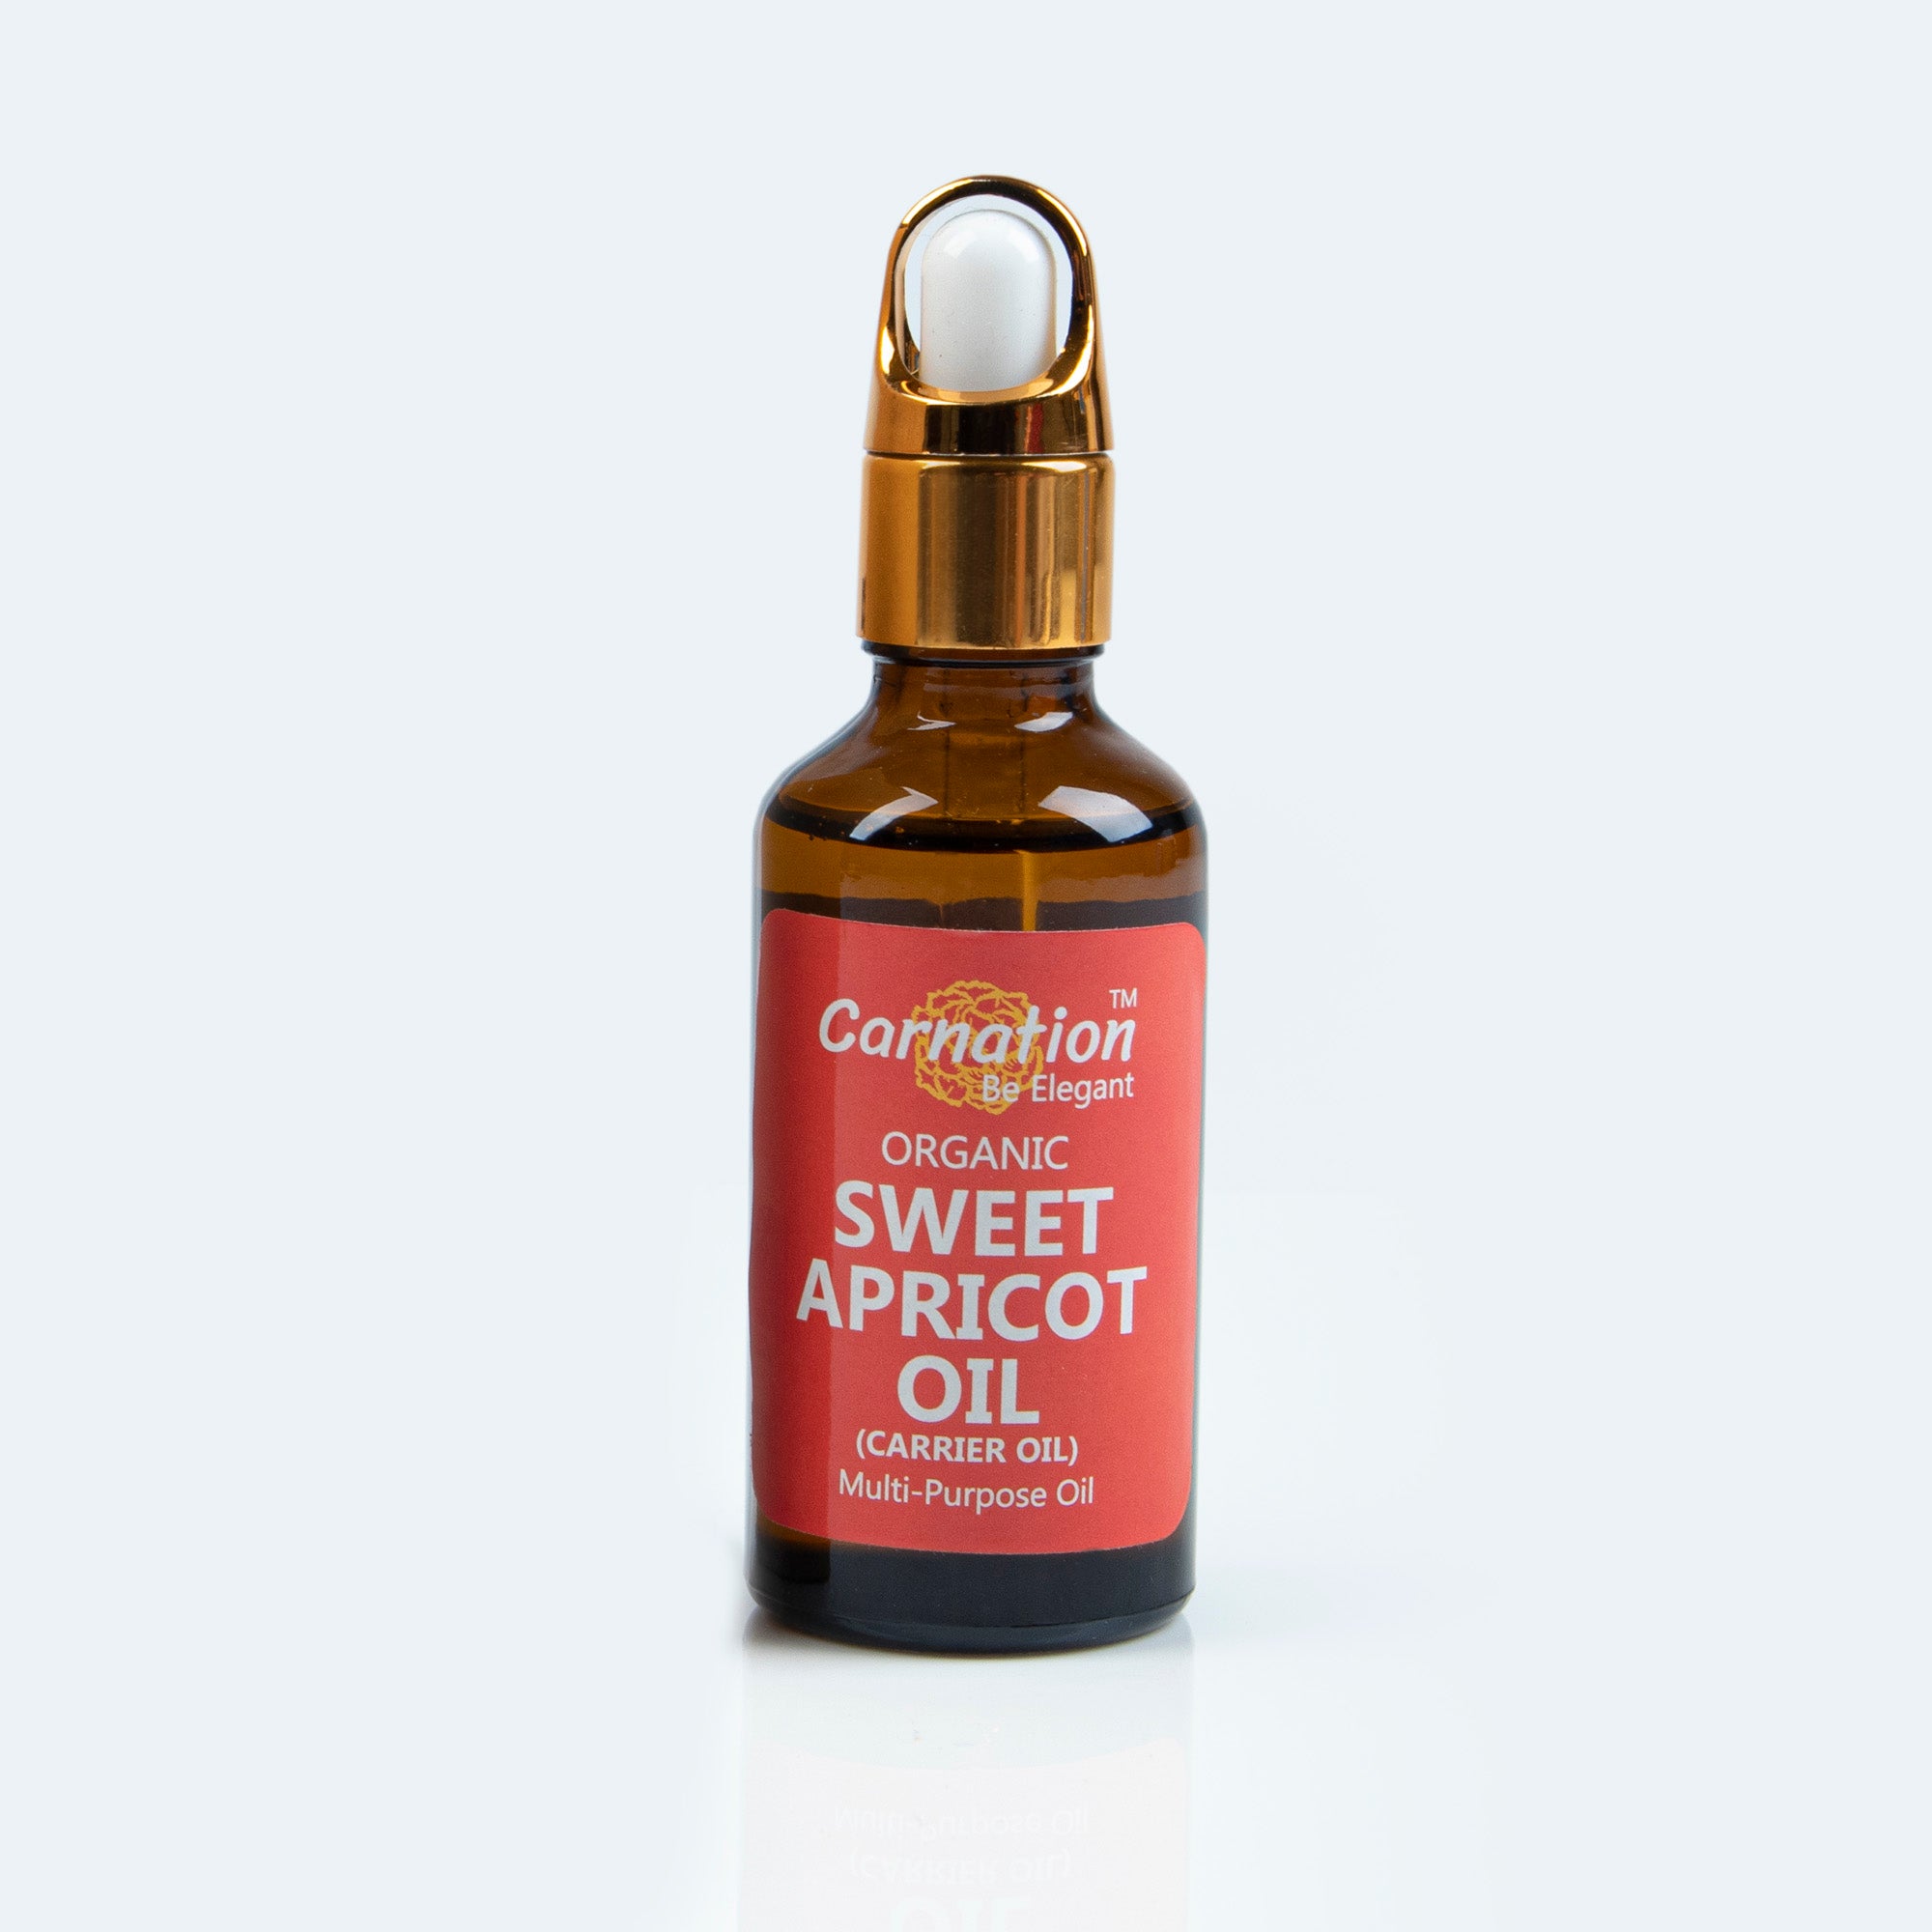 Sweet Apricot Oil benefits